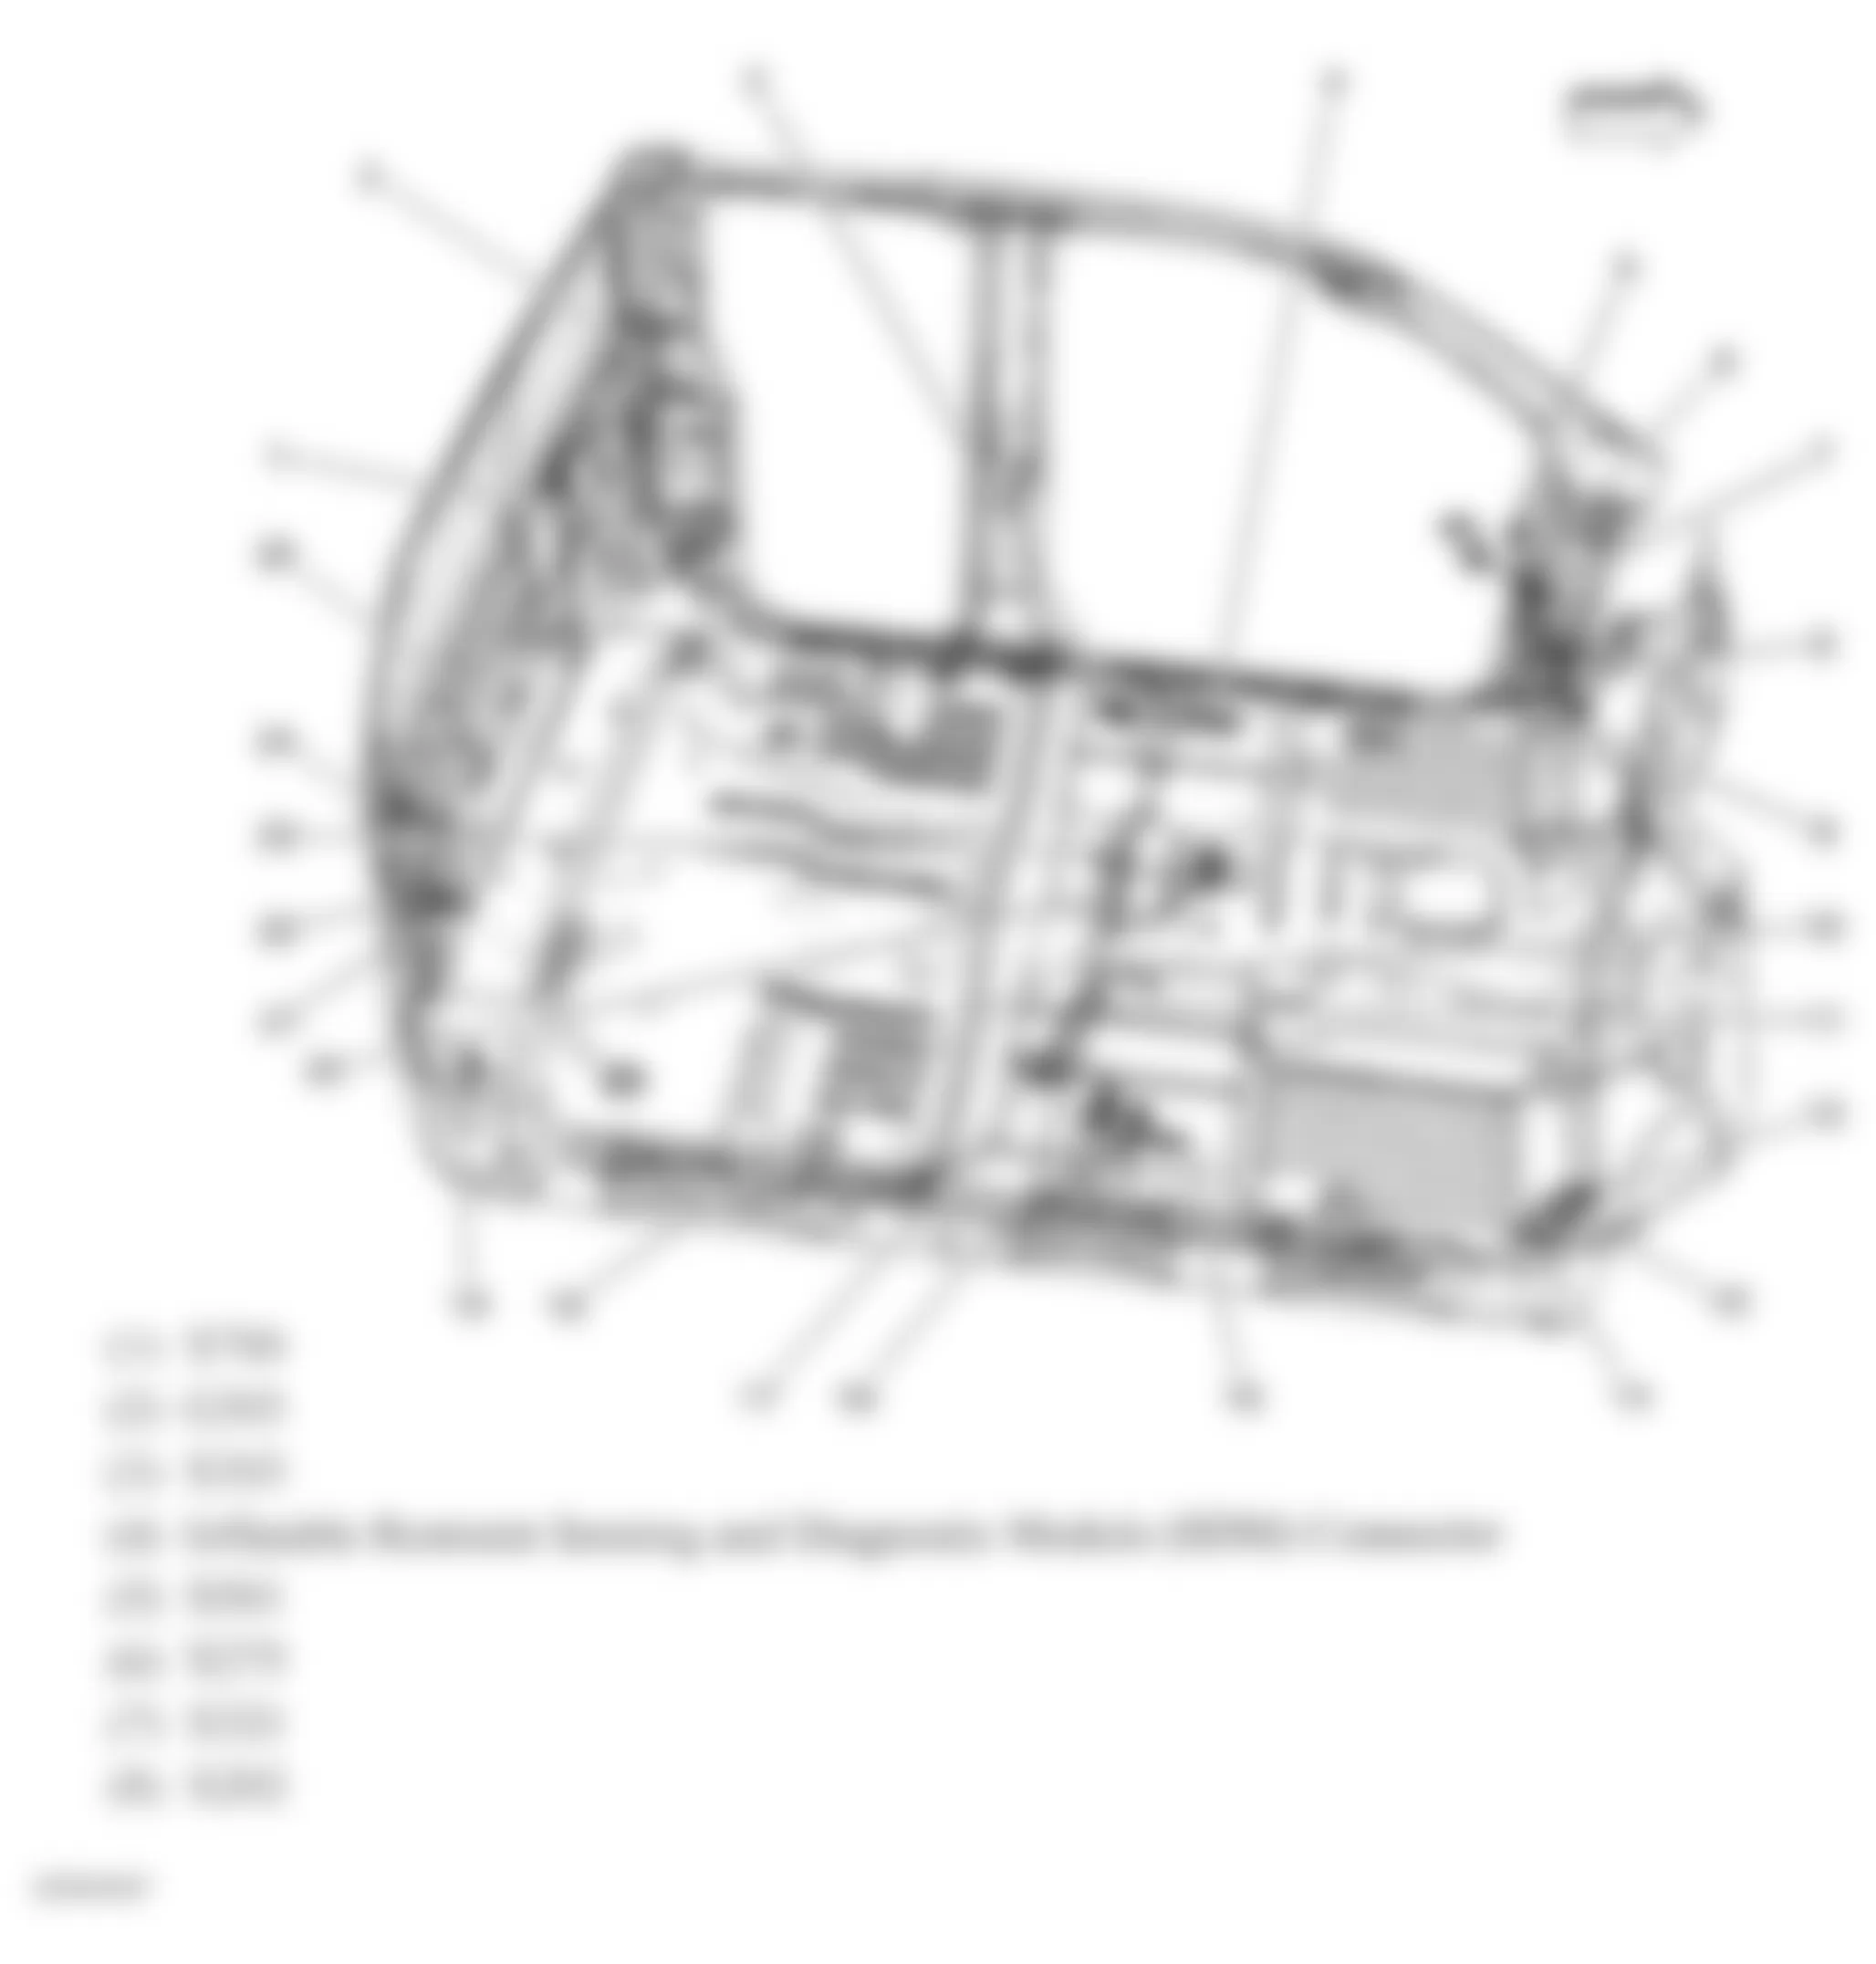 Chevrolet Silverado 1500 2009 - Component Locations -  Passenger Compartment (Extended Cab) (1 Of 2)